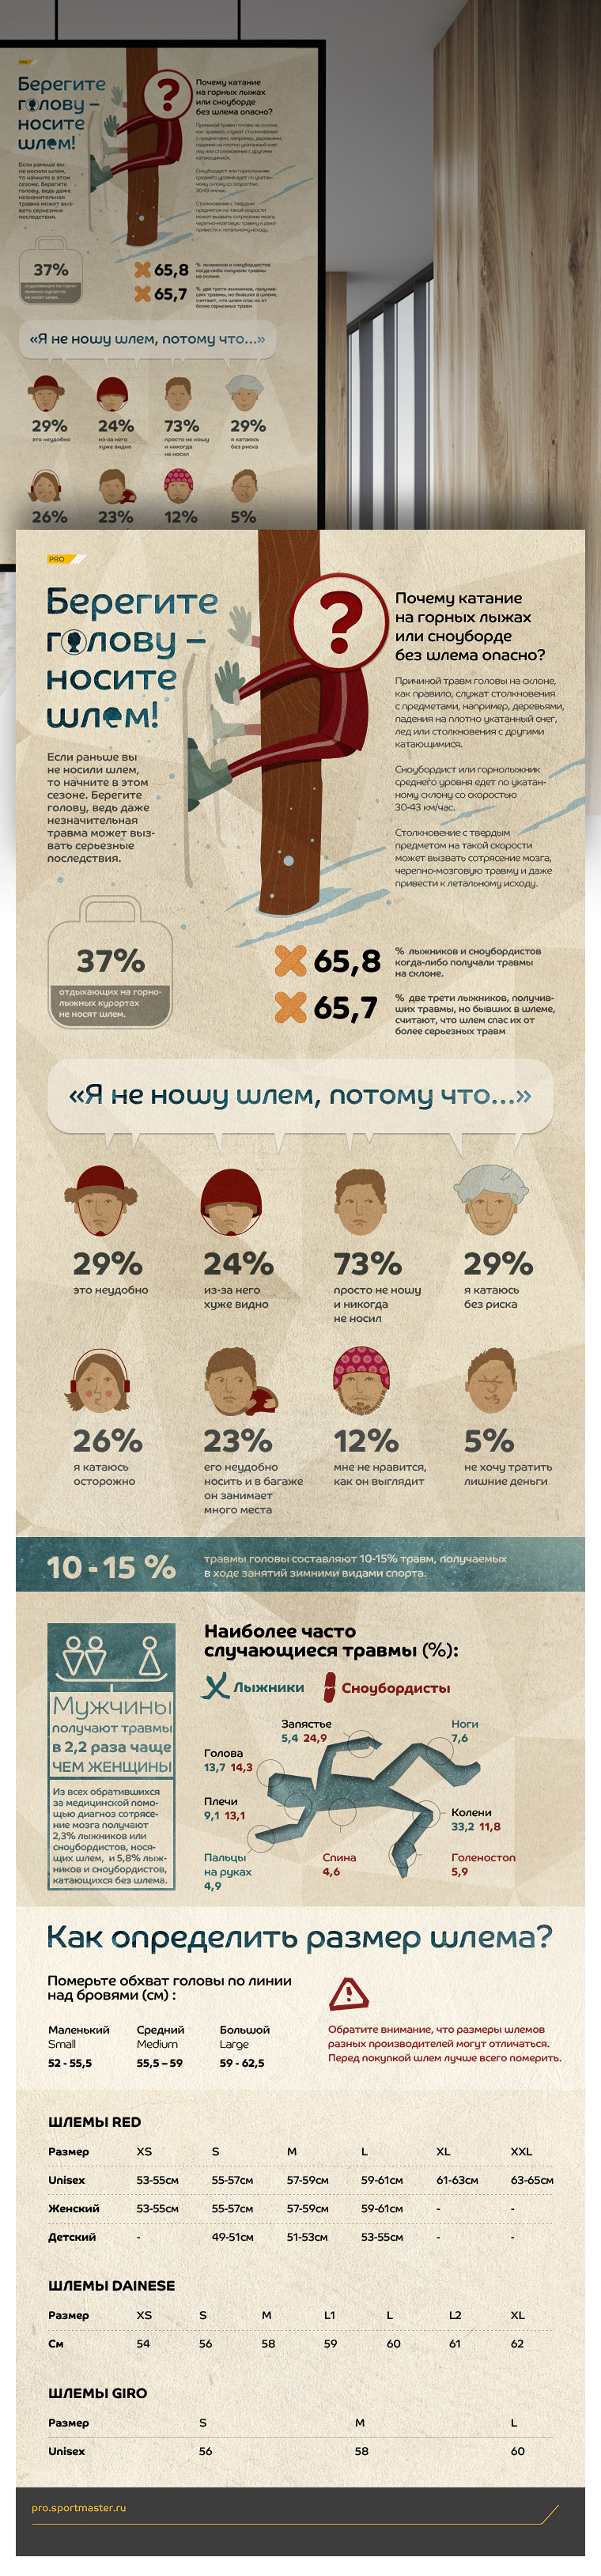 Эскиз проекта Infographic poster "Take care of your head - wear a helmet!"